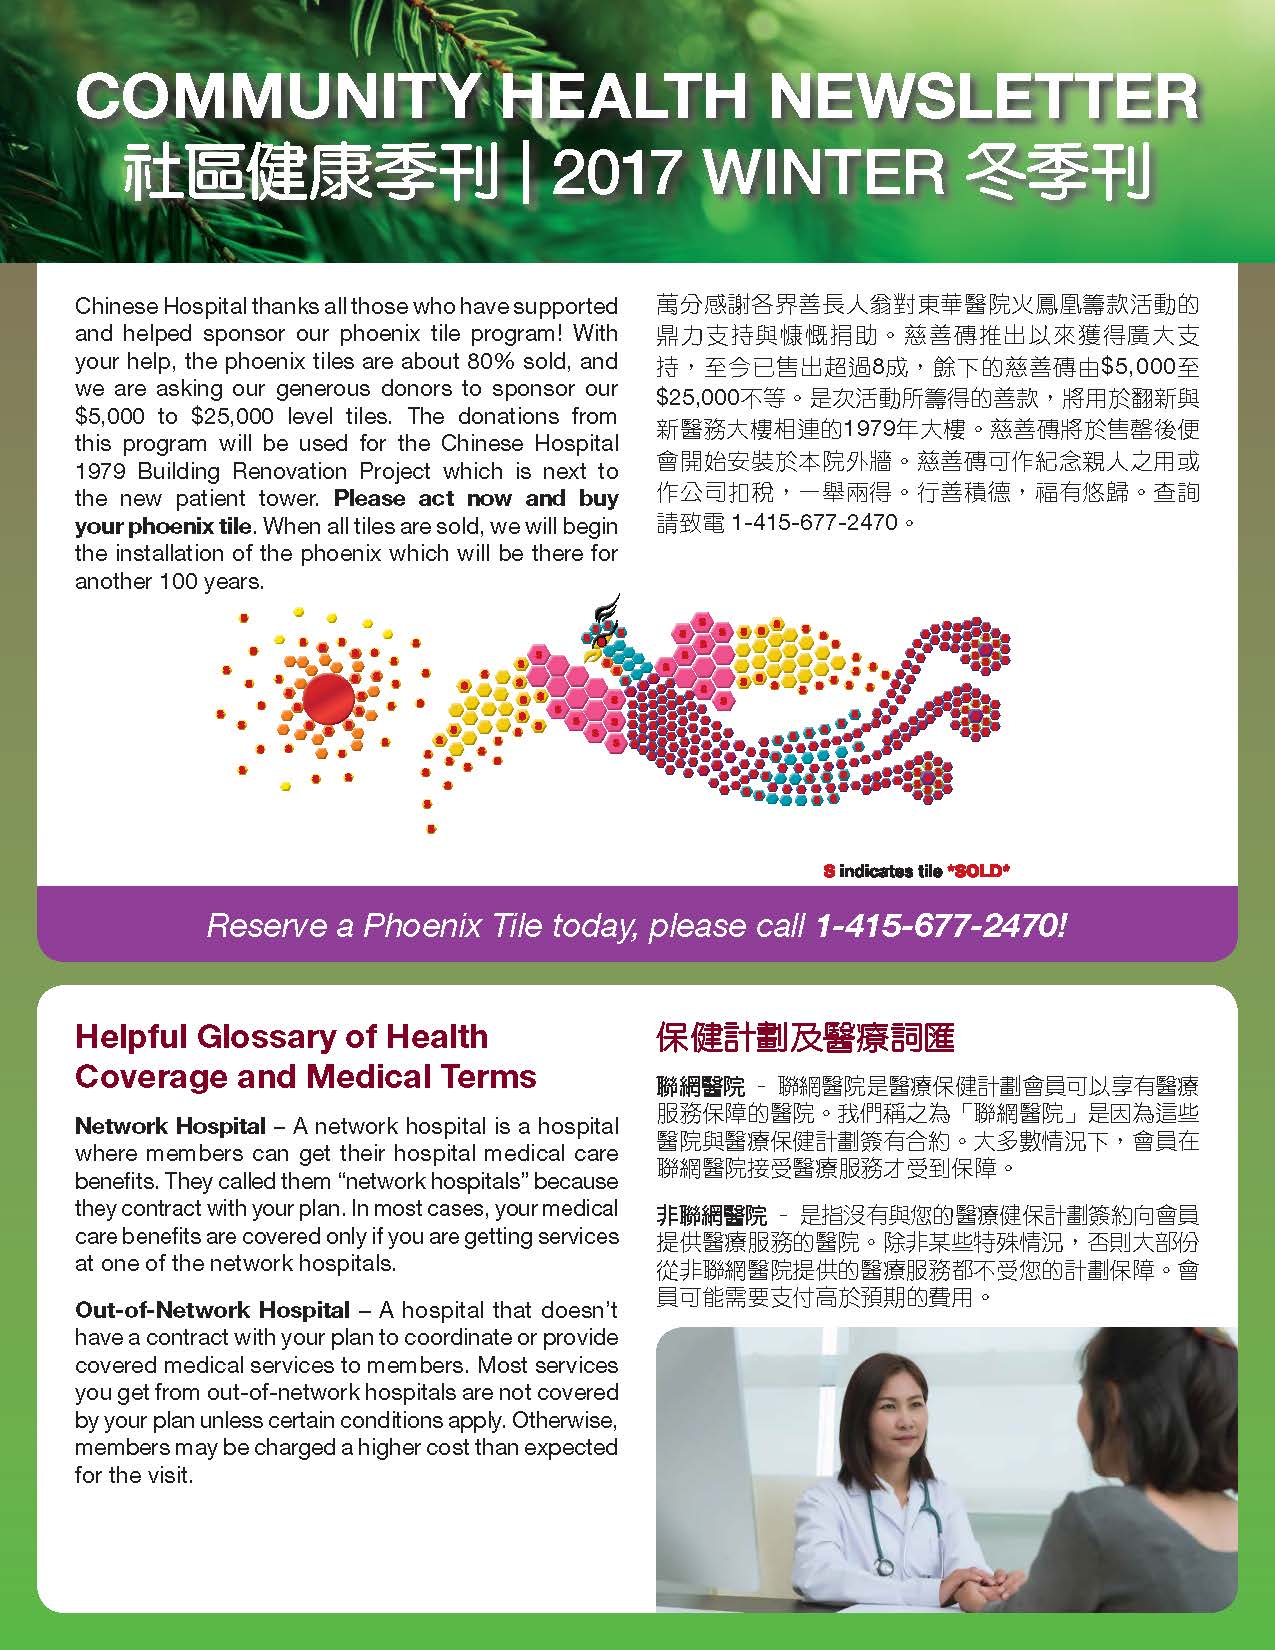 CCHP 2017 winter newsletter, information of Chinese Hospital